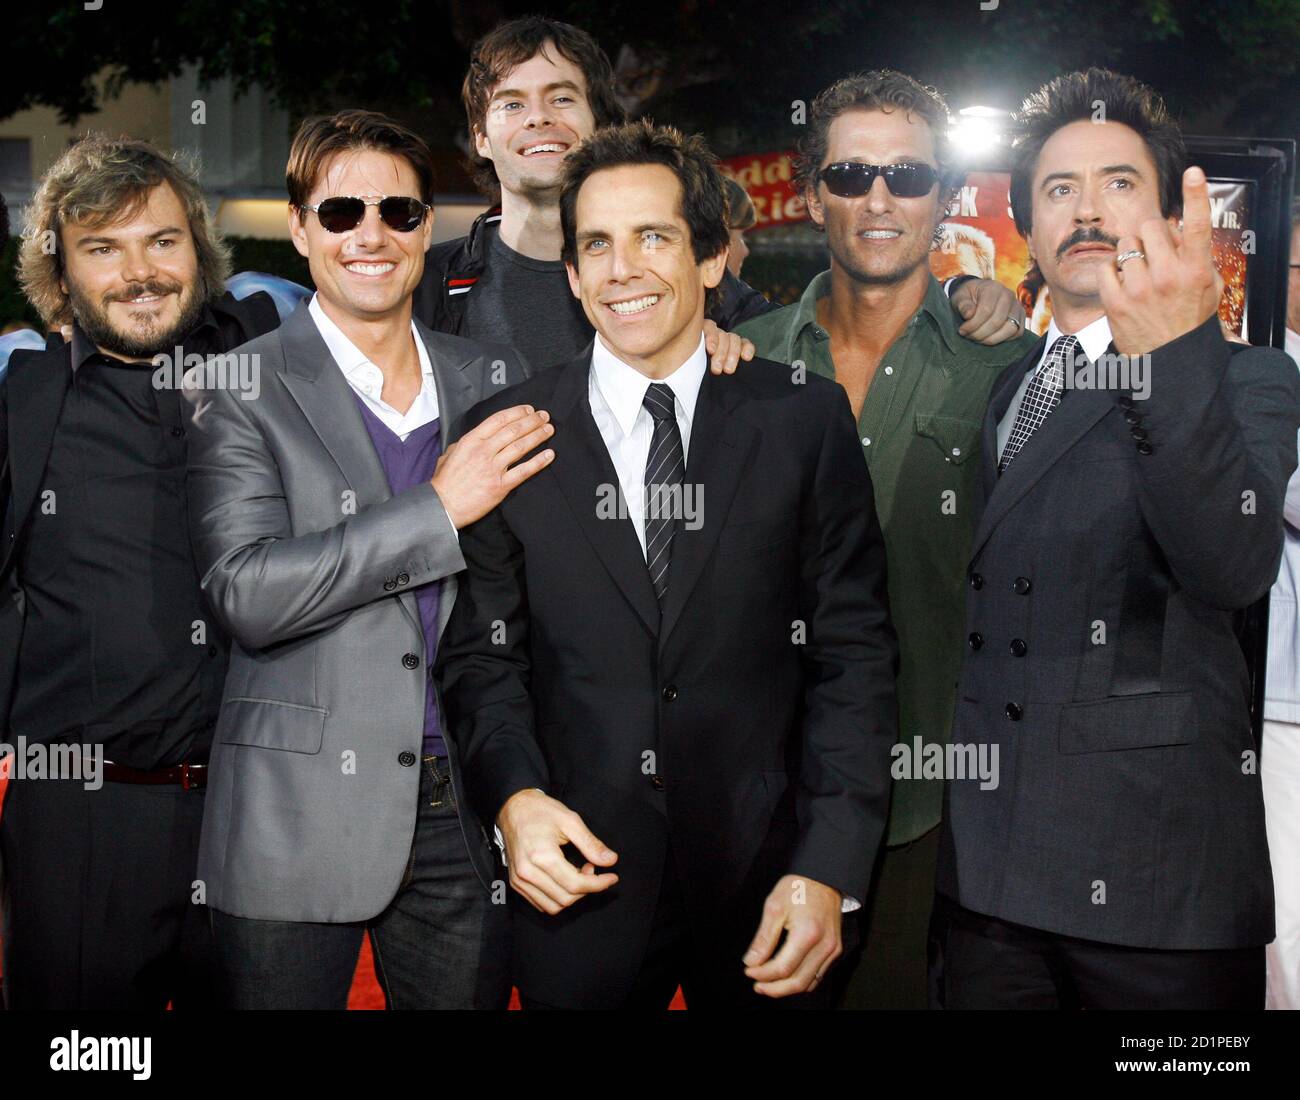 Cast members (from L-R) Jack Black, Tom Cruise, Bill Hader, Ben Stiller, Matthew  McConaughey and Robert Downey Jr. pose at the premiere of "Tropic Thunder"  at the Mann's Village theatre in Westwood,